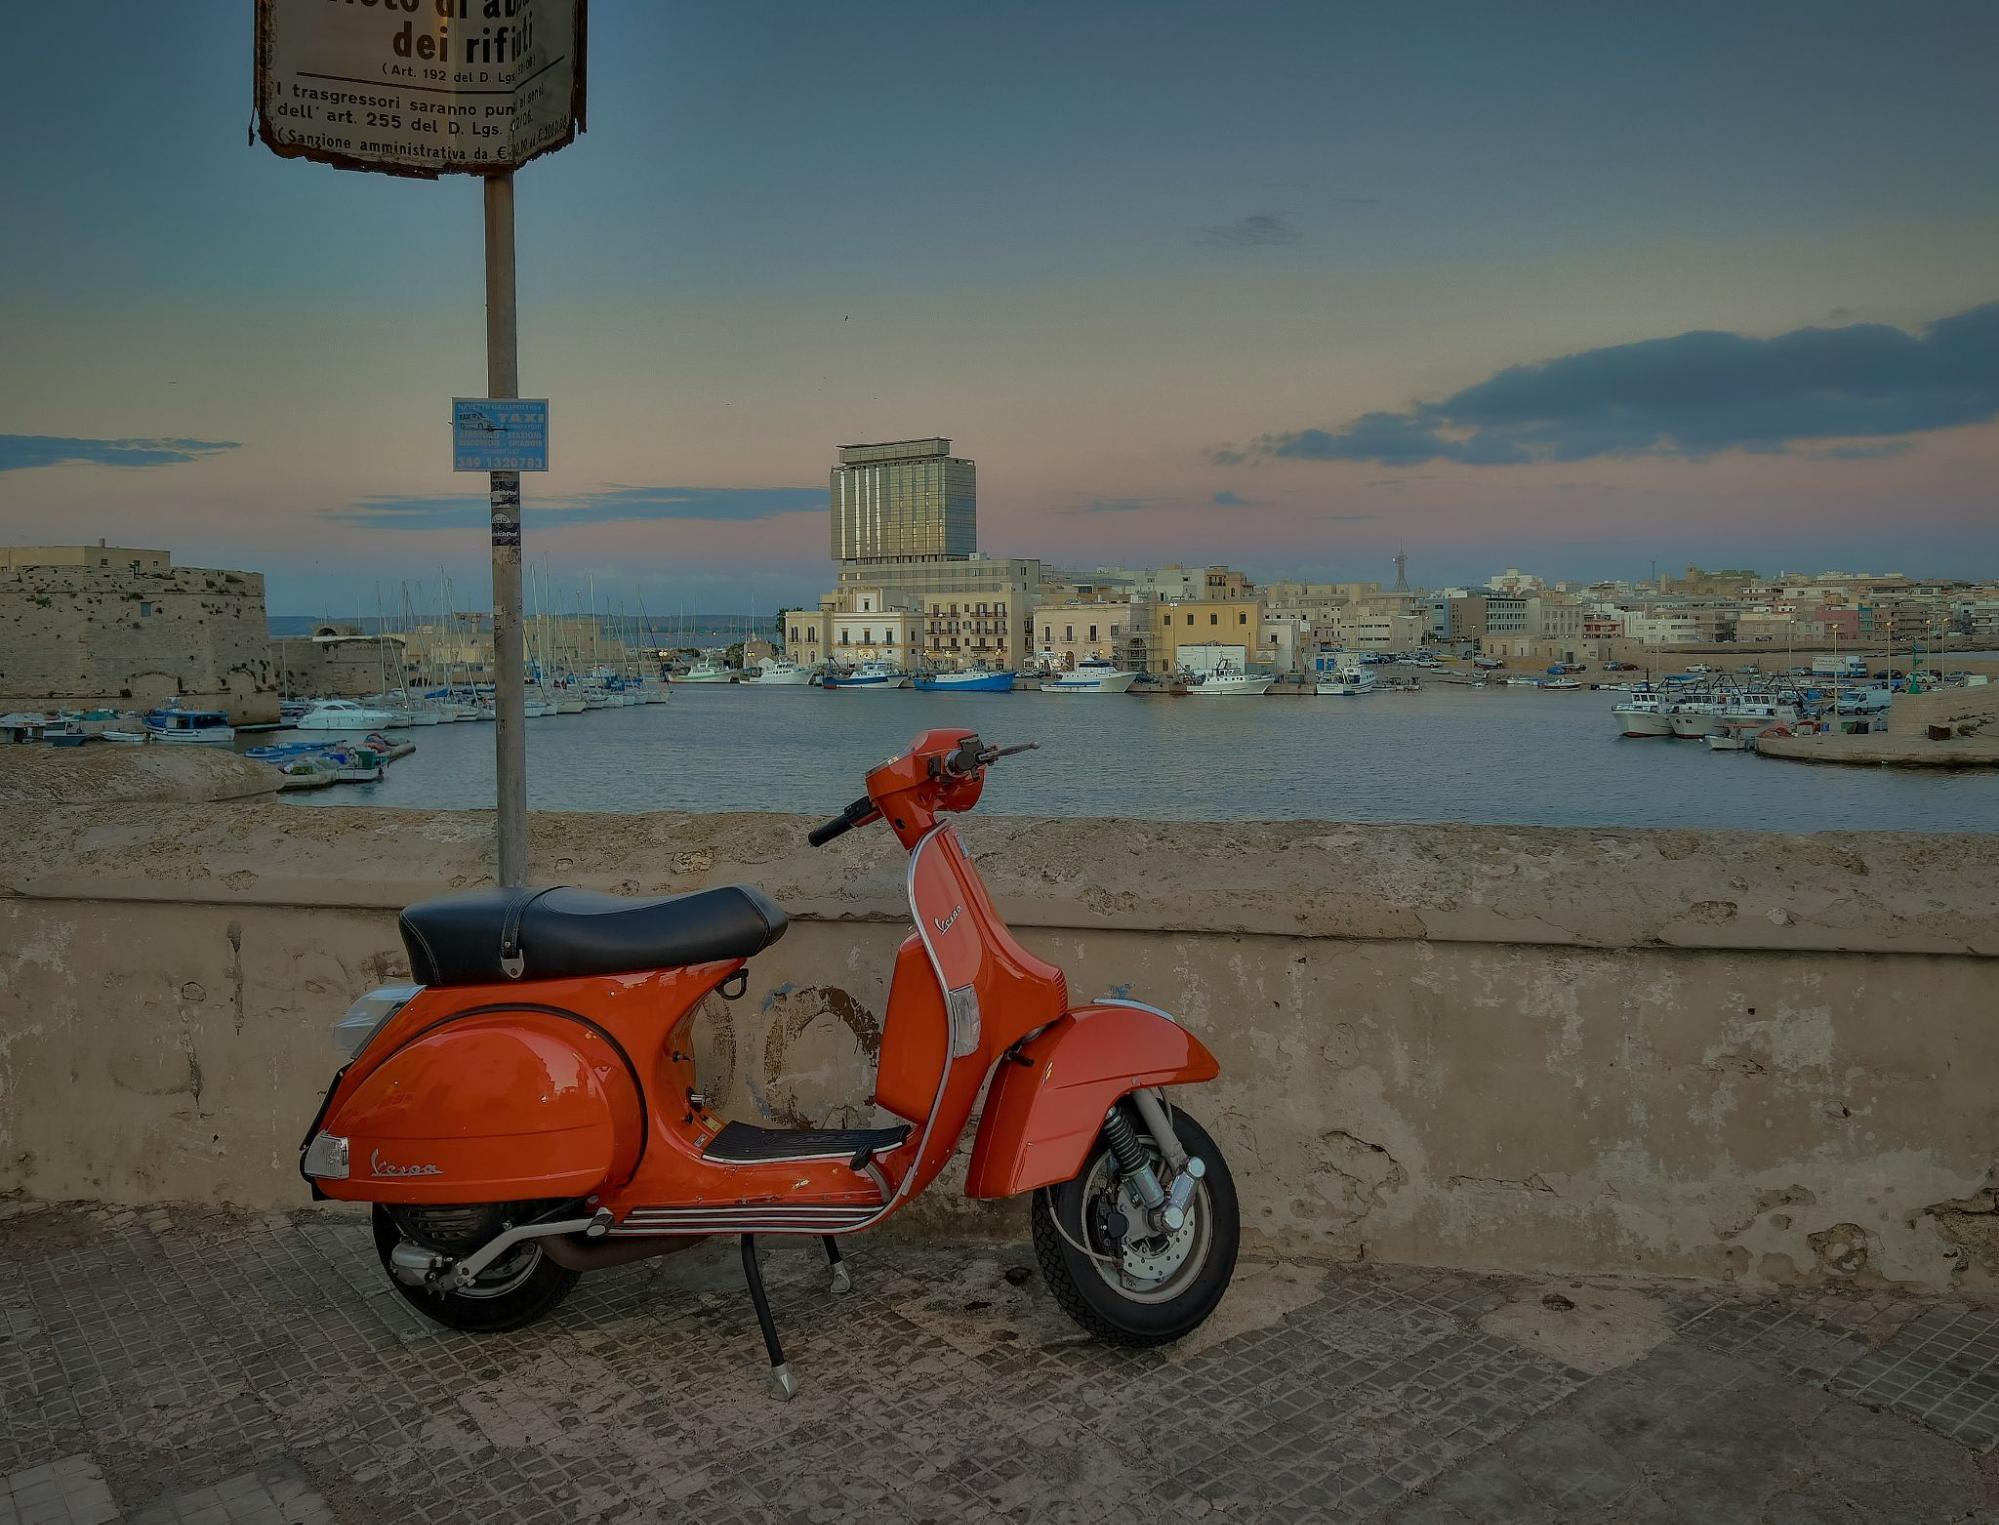 A red scooter parked in Lecce, Italy